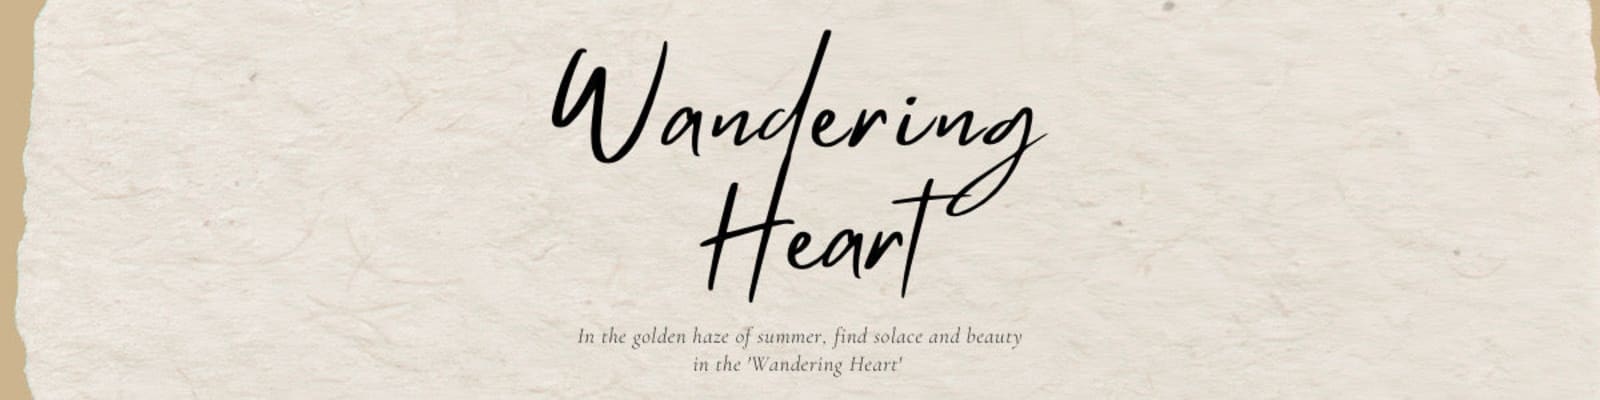 wandering heart collection